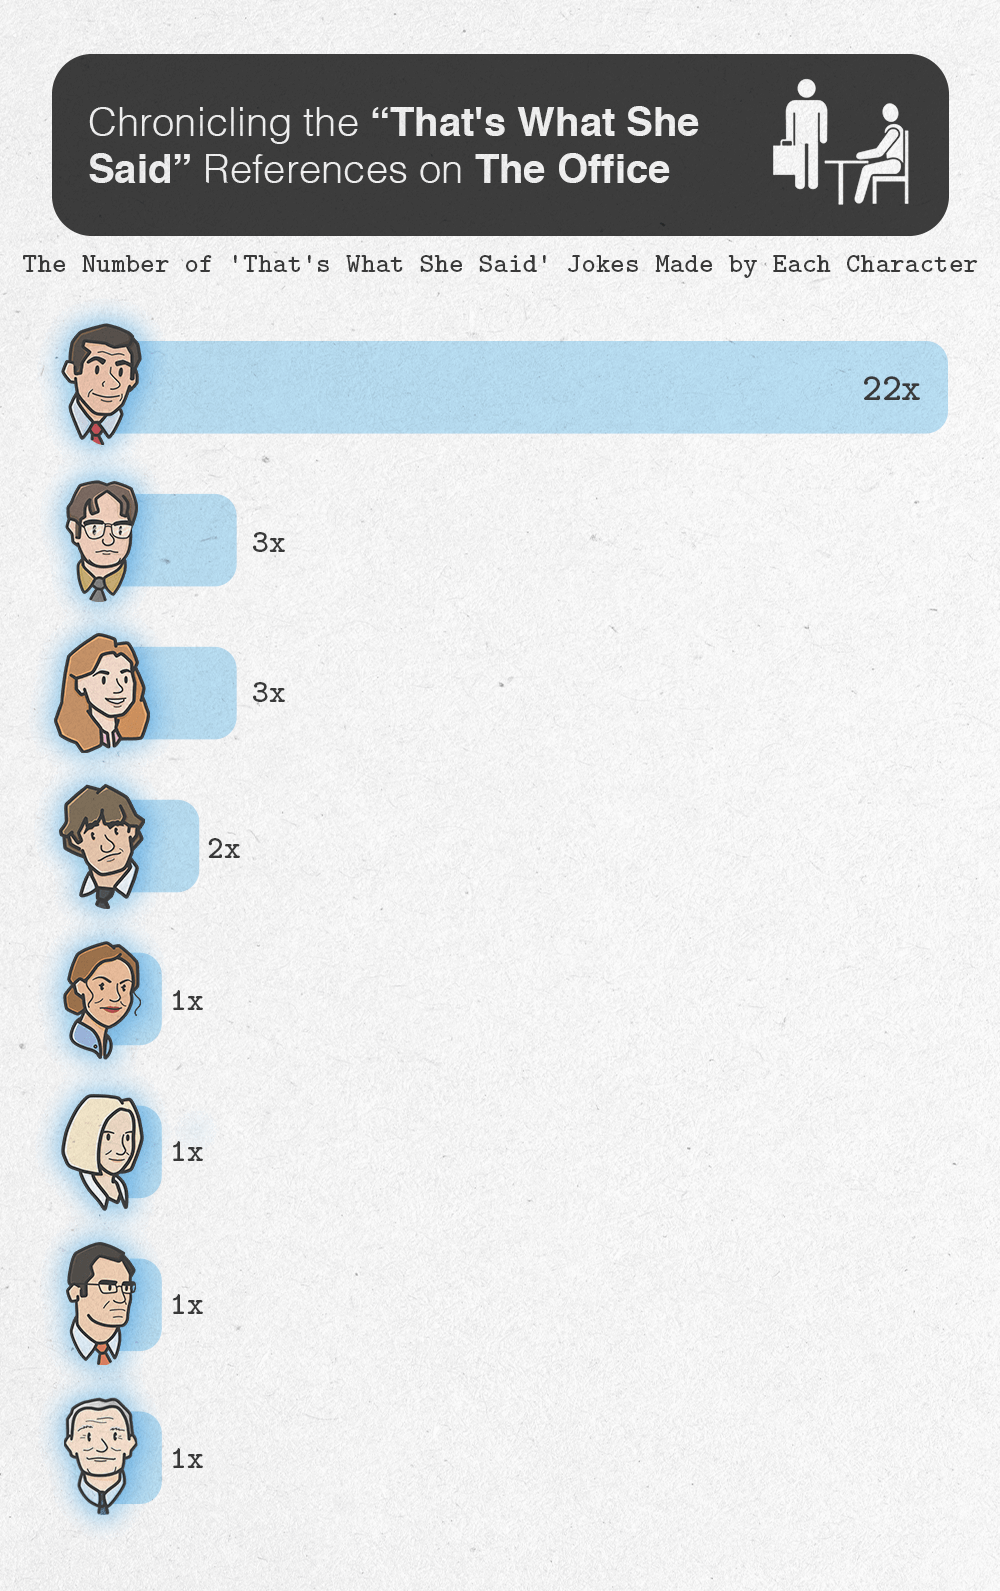 Table showing number of times each character says “That’s what she said” on The Office